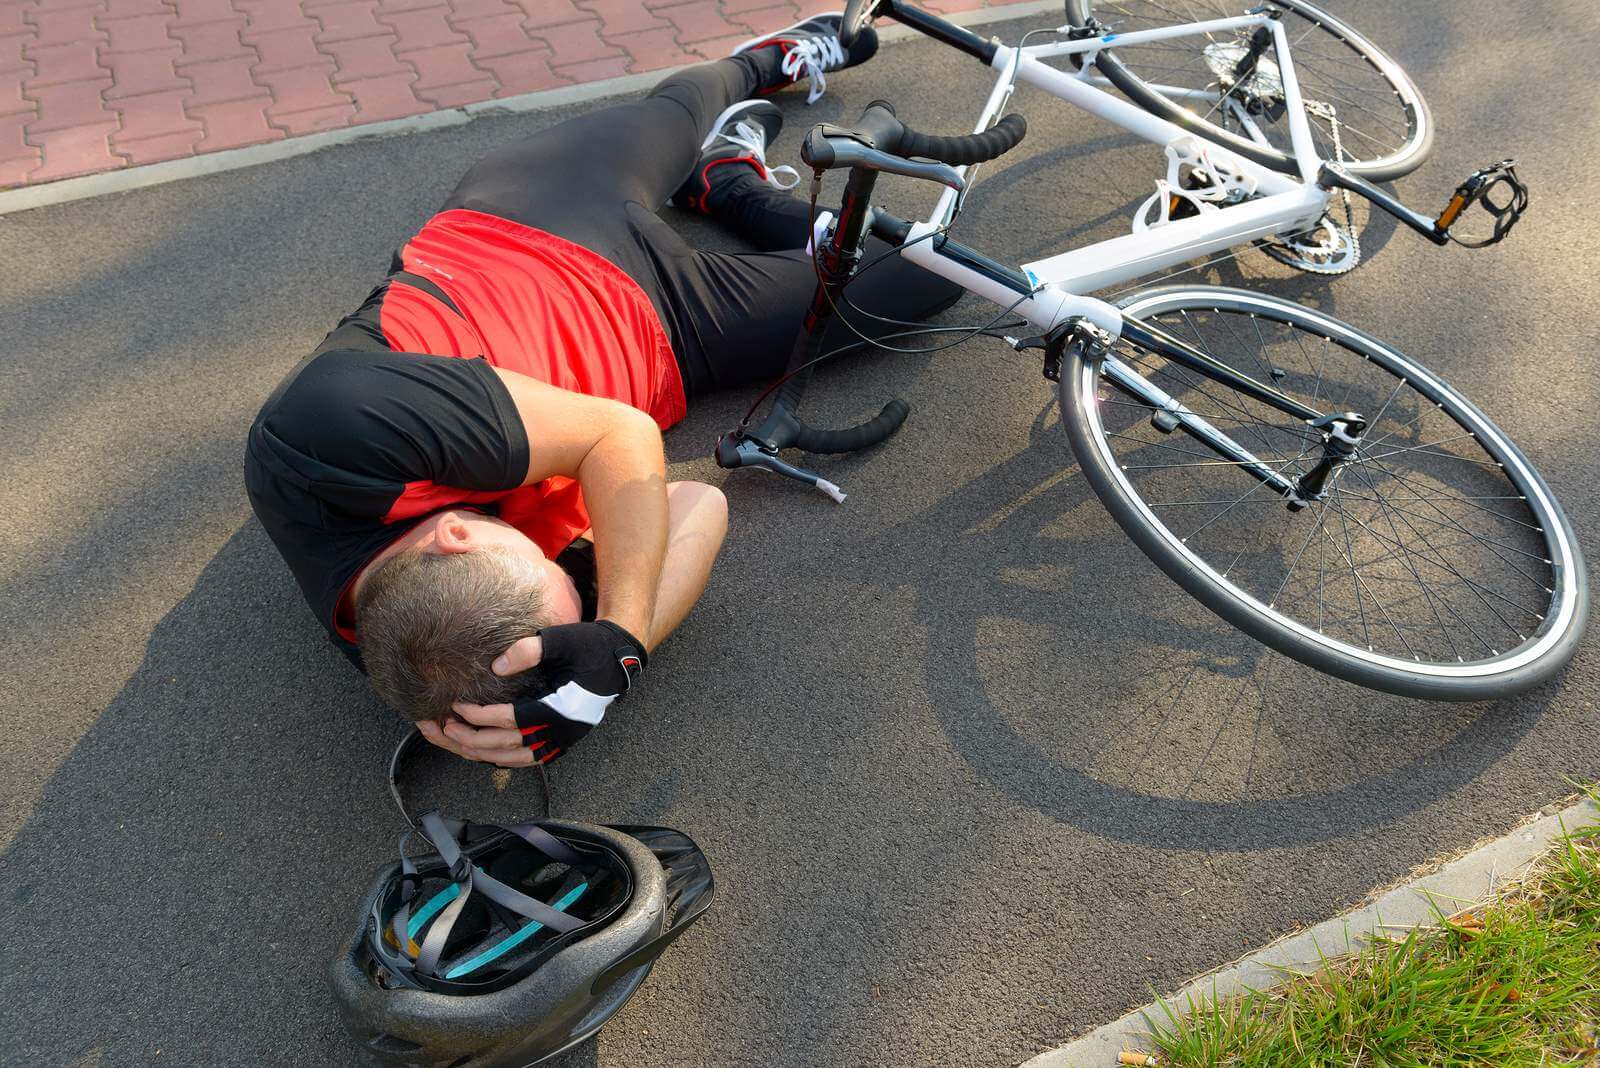 Oakland Best Bicycle Accident Lawyer